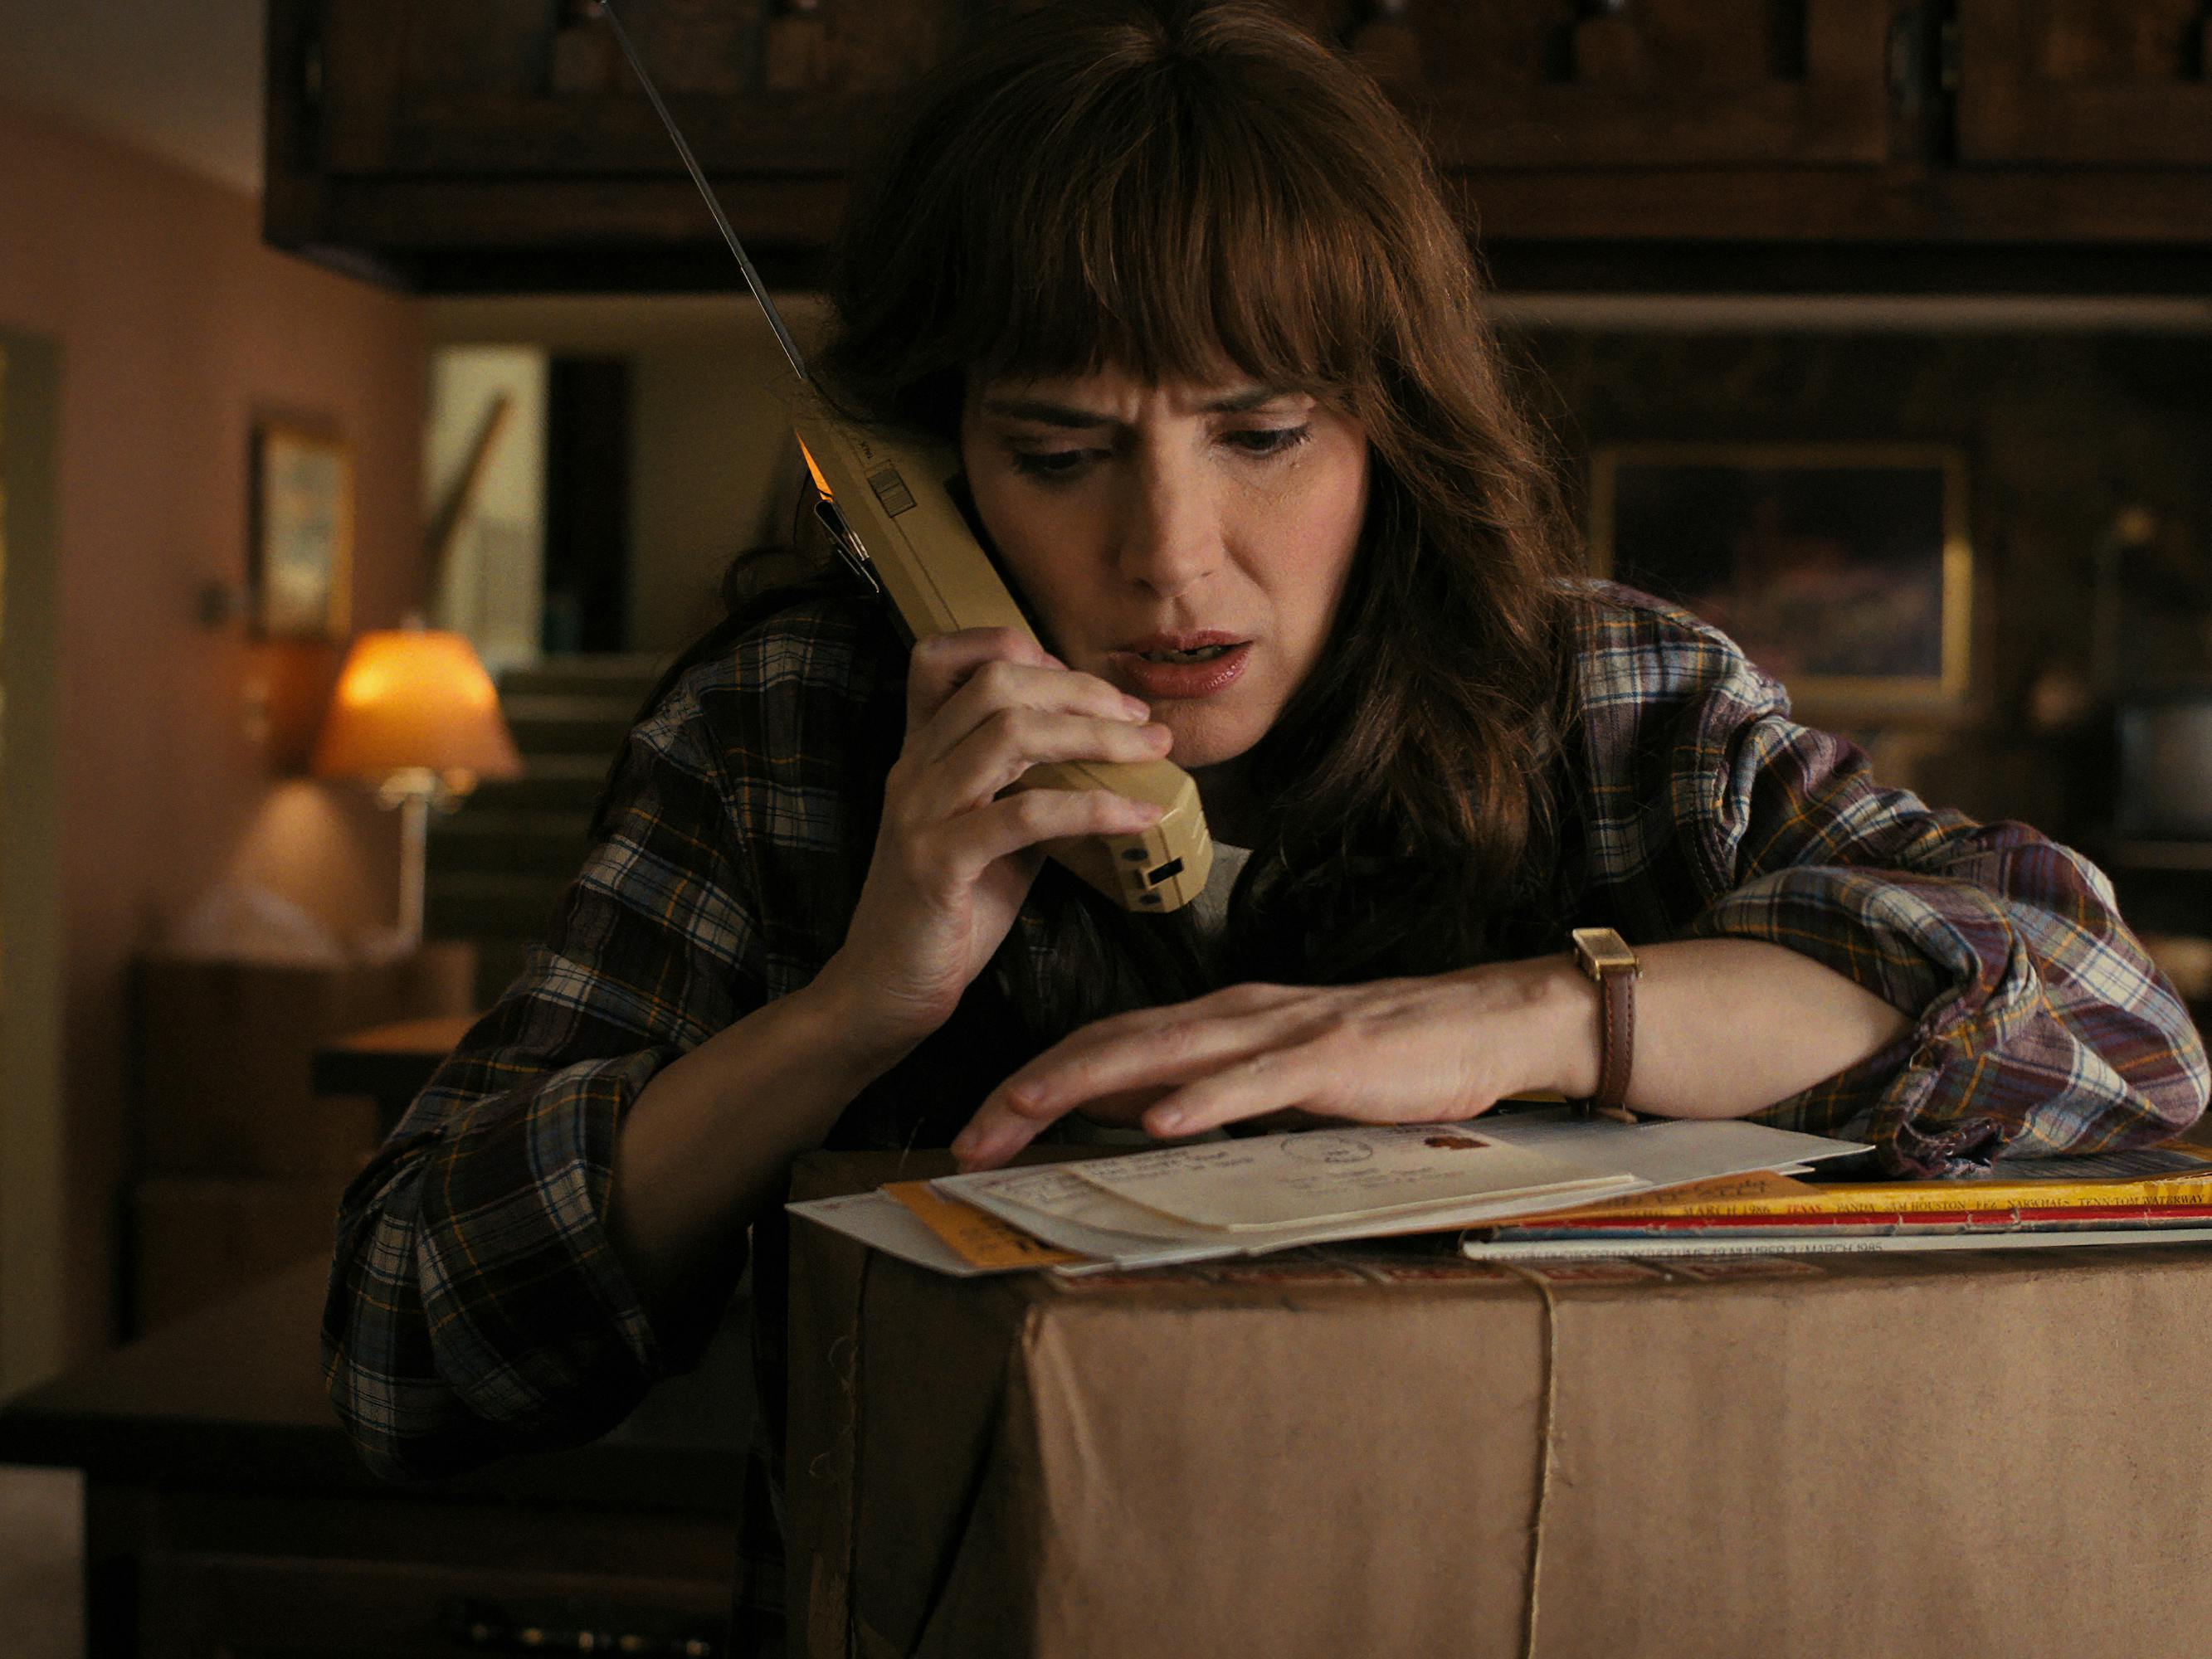 Joyce Byers (Winona Ryder) talks into a phone as she rests on a large package. She wears a flannel shirt and has impressive bangs.